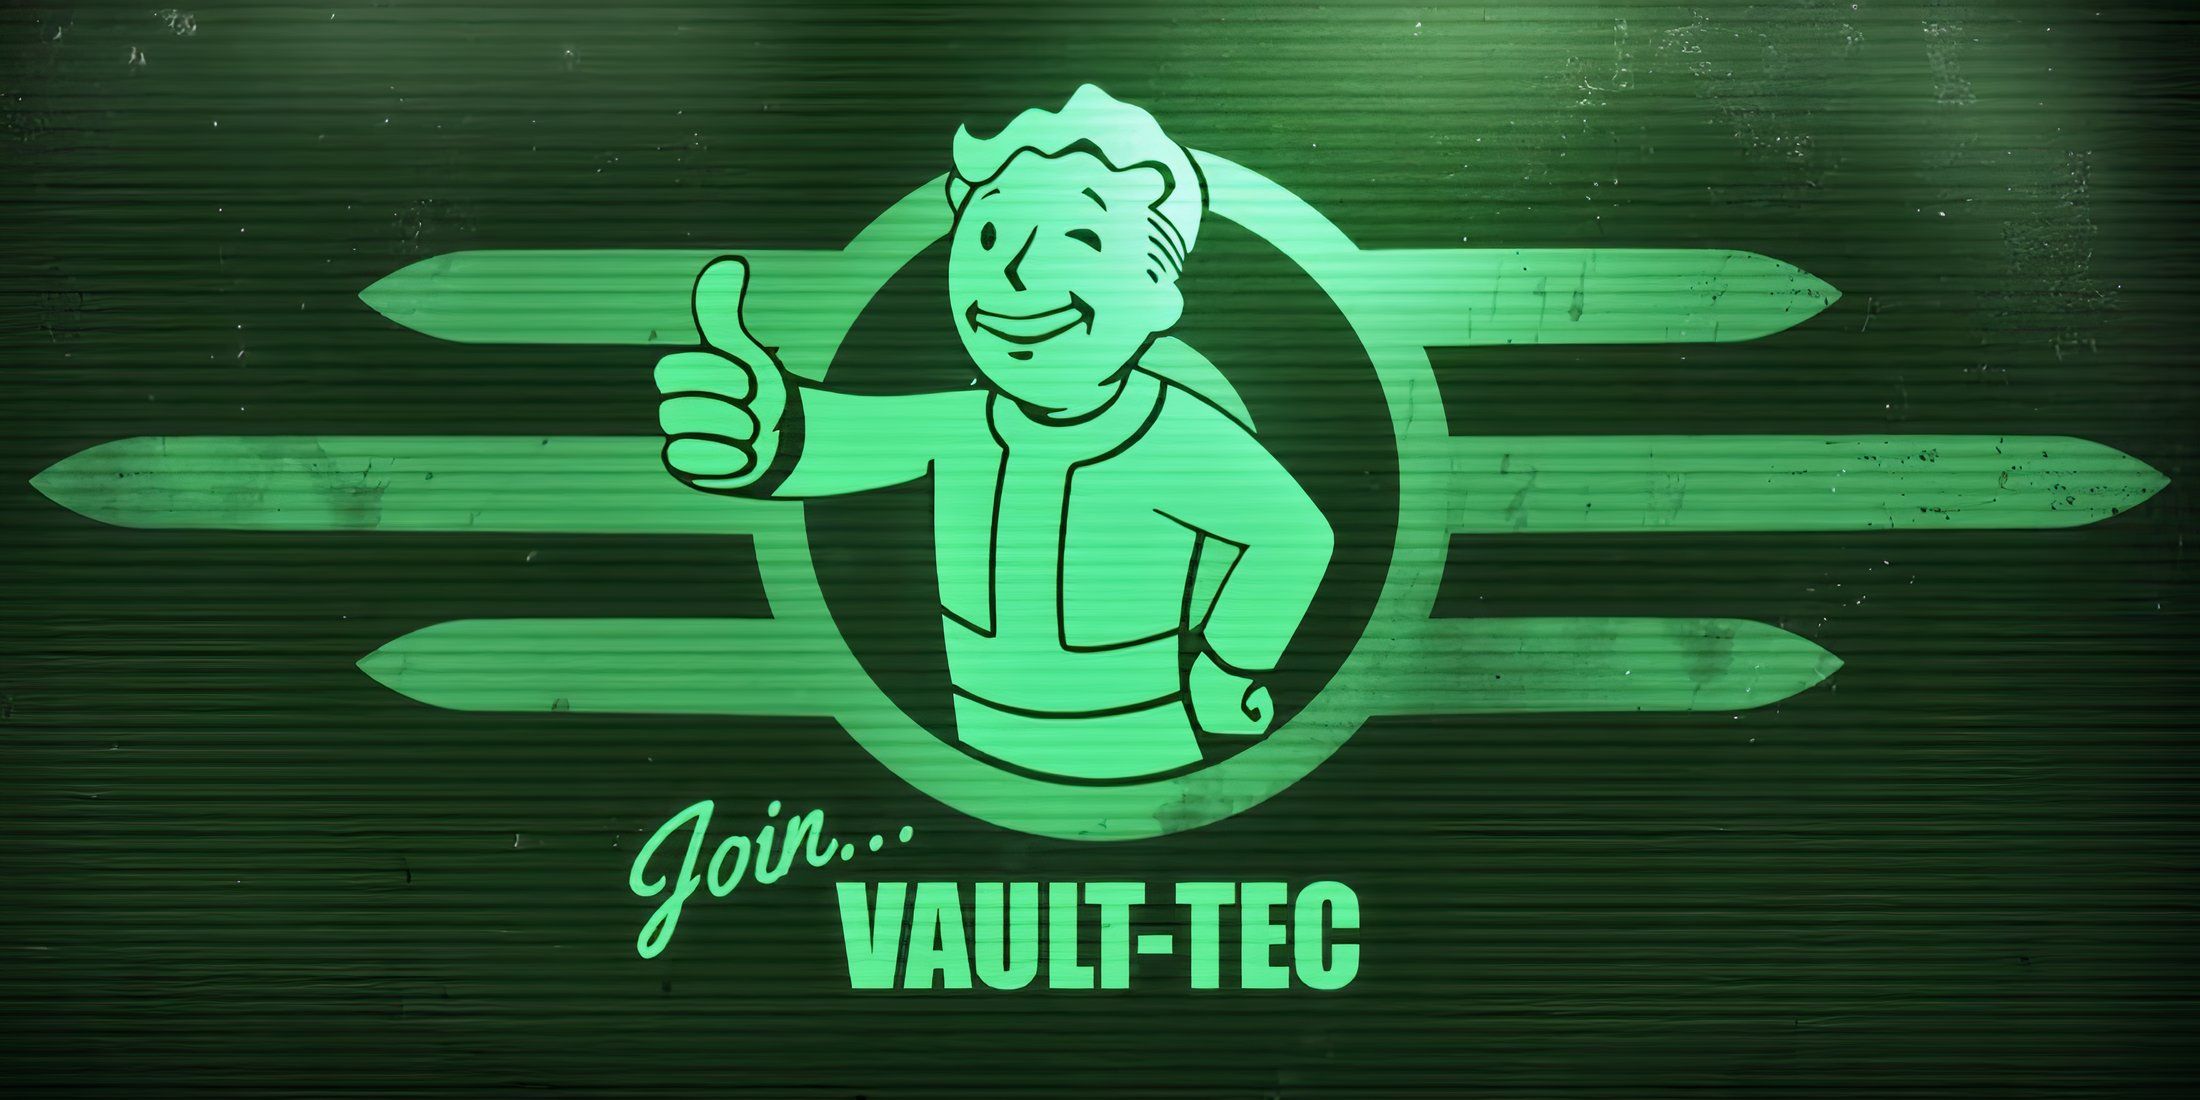 A character from Amazon’s Fallout series should appear in a game